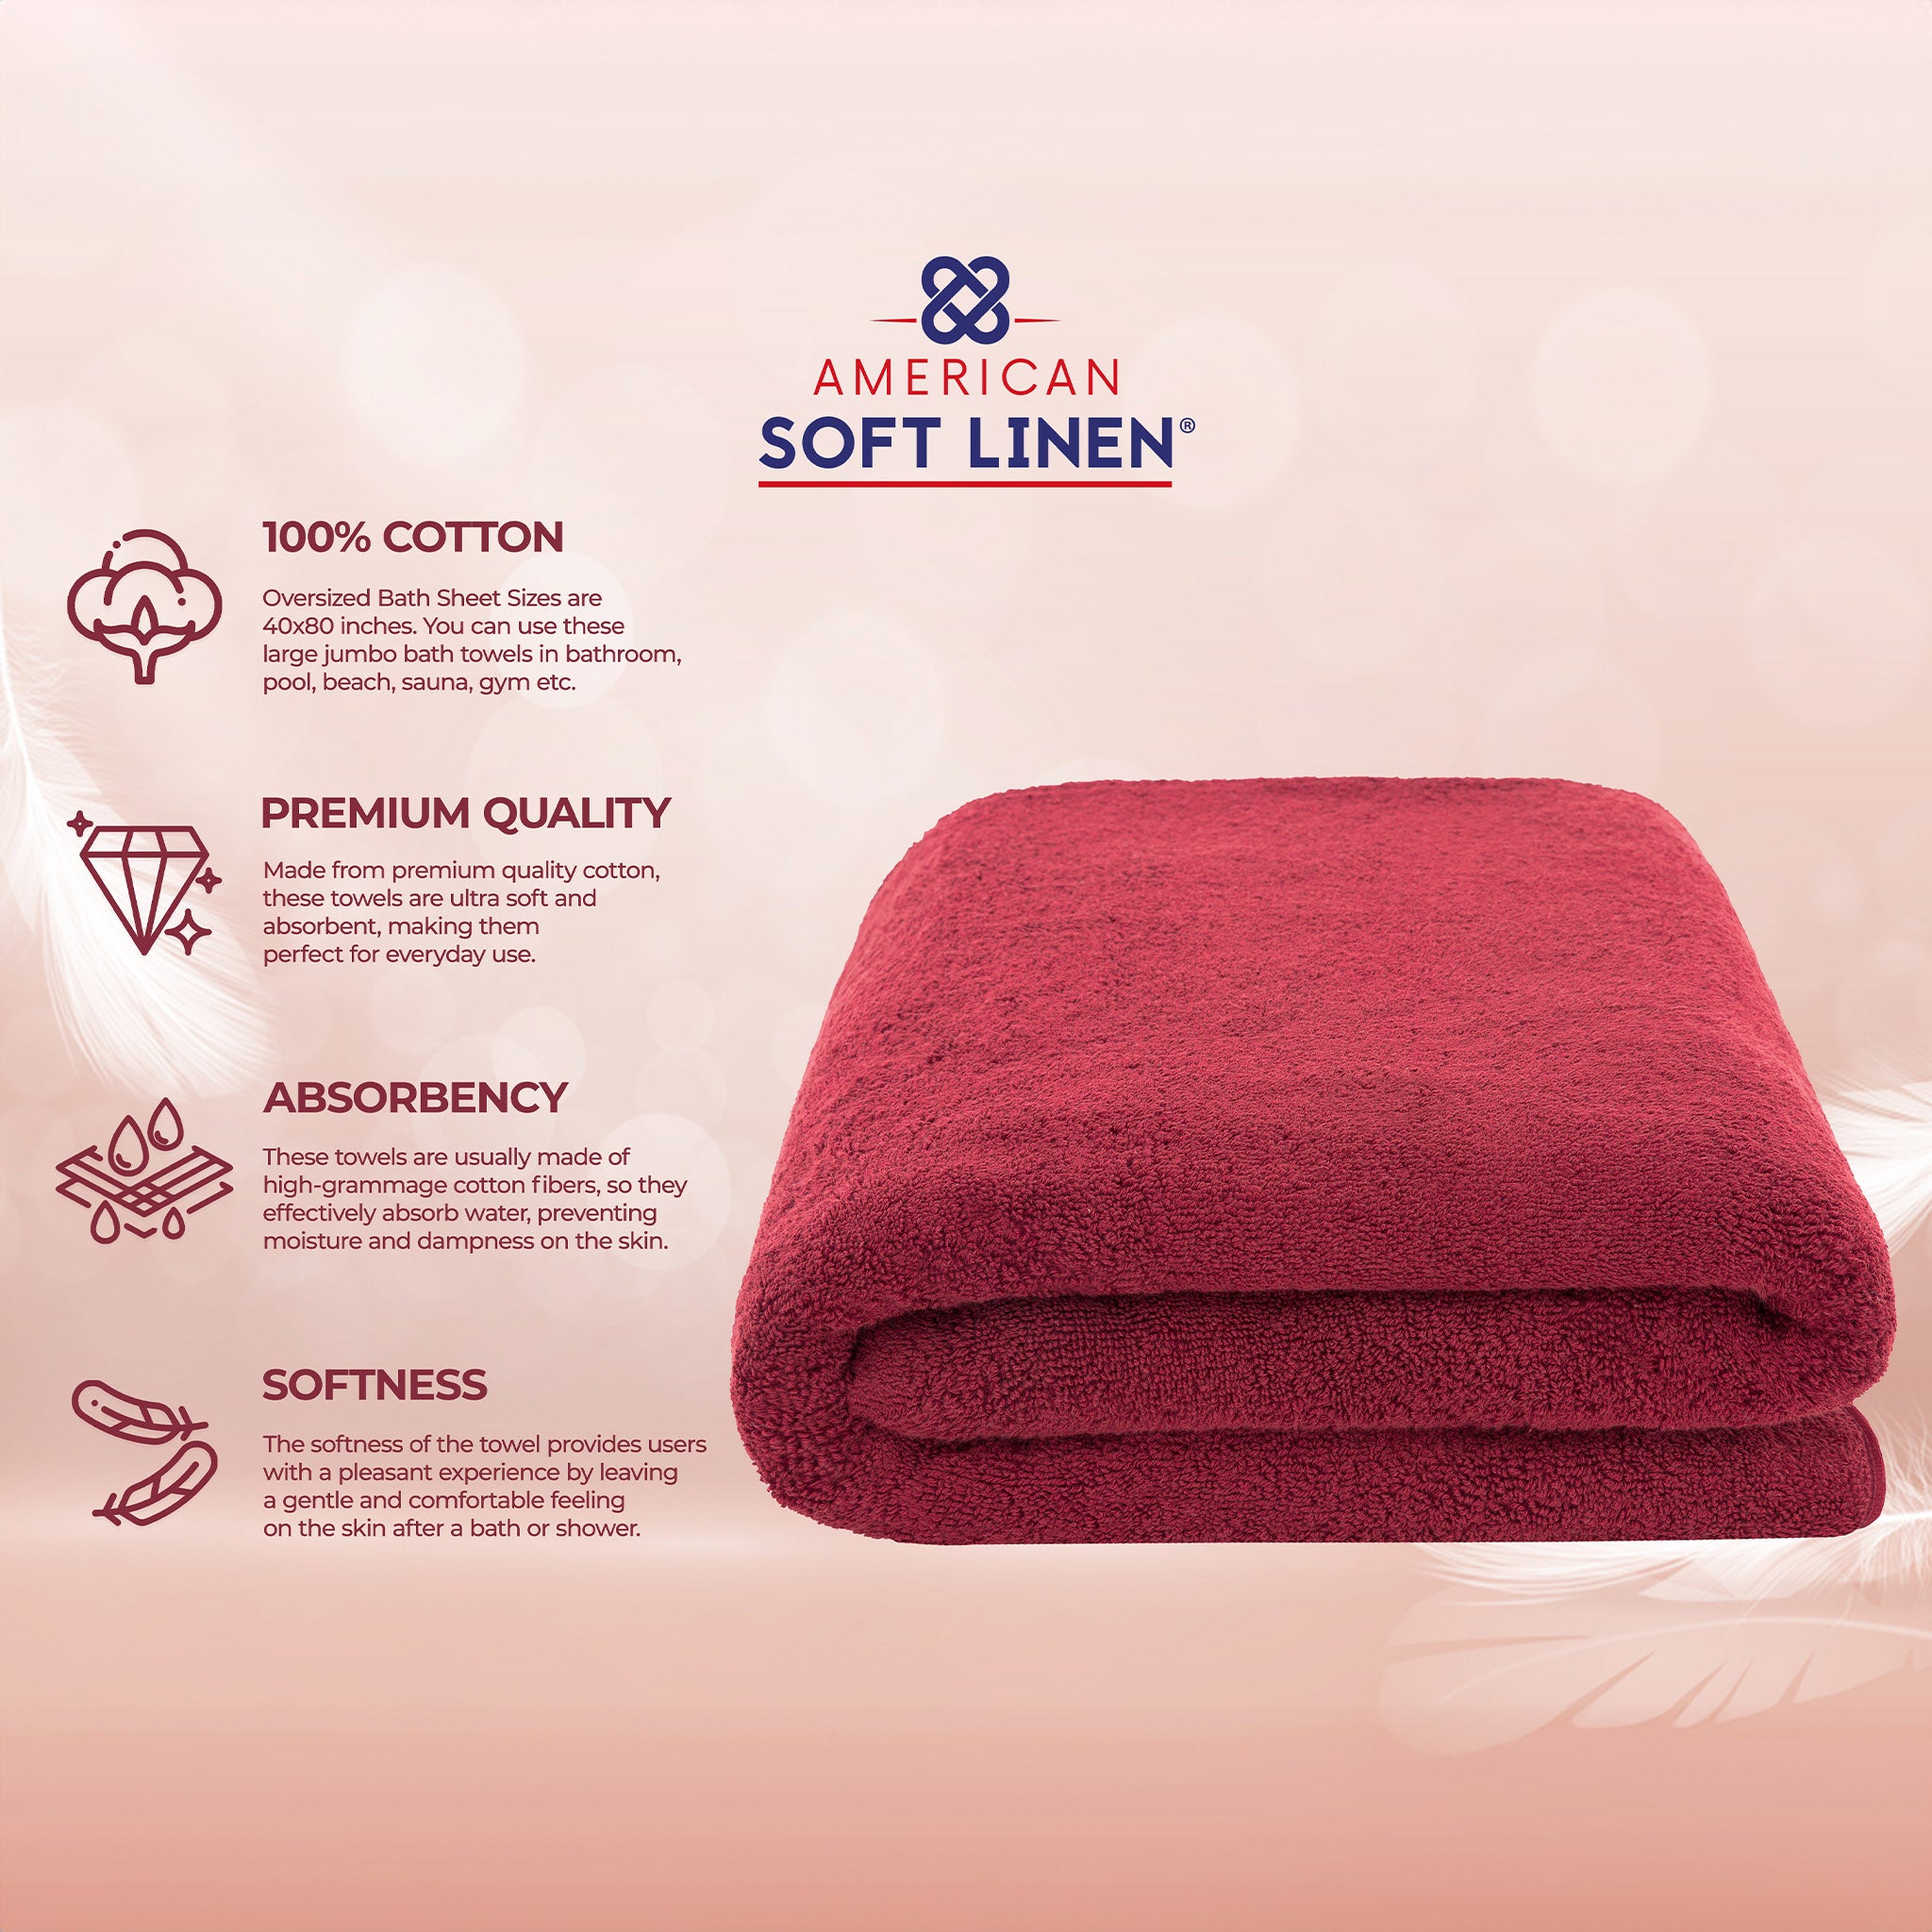 American Soft Linen 100% Ring Spun Cotton 40x80 Inches Oversized Bath Sheets bordeaux-red-4